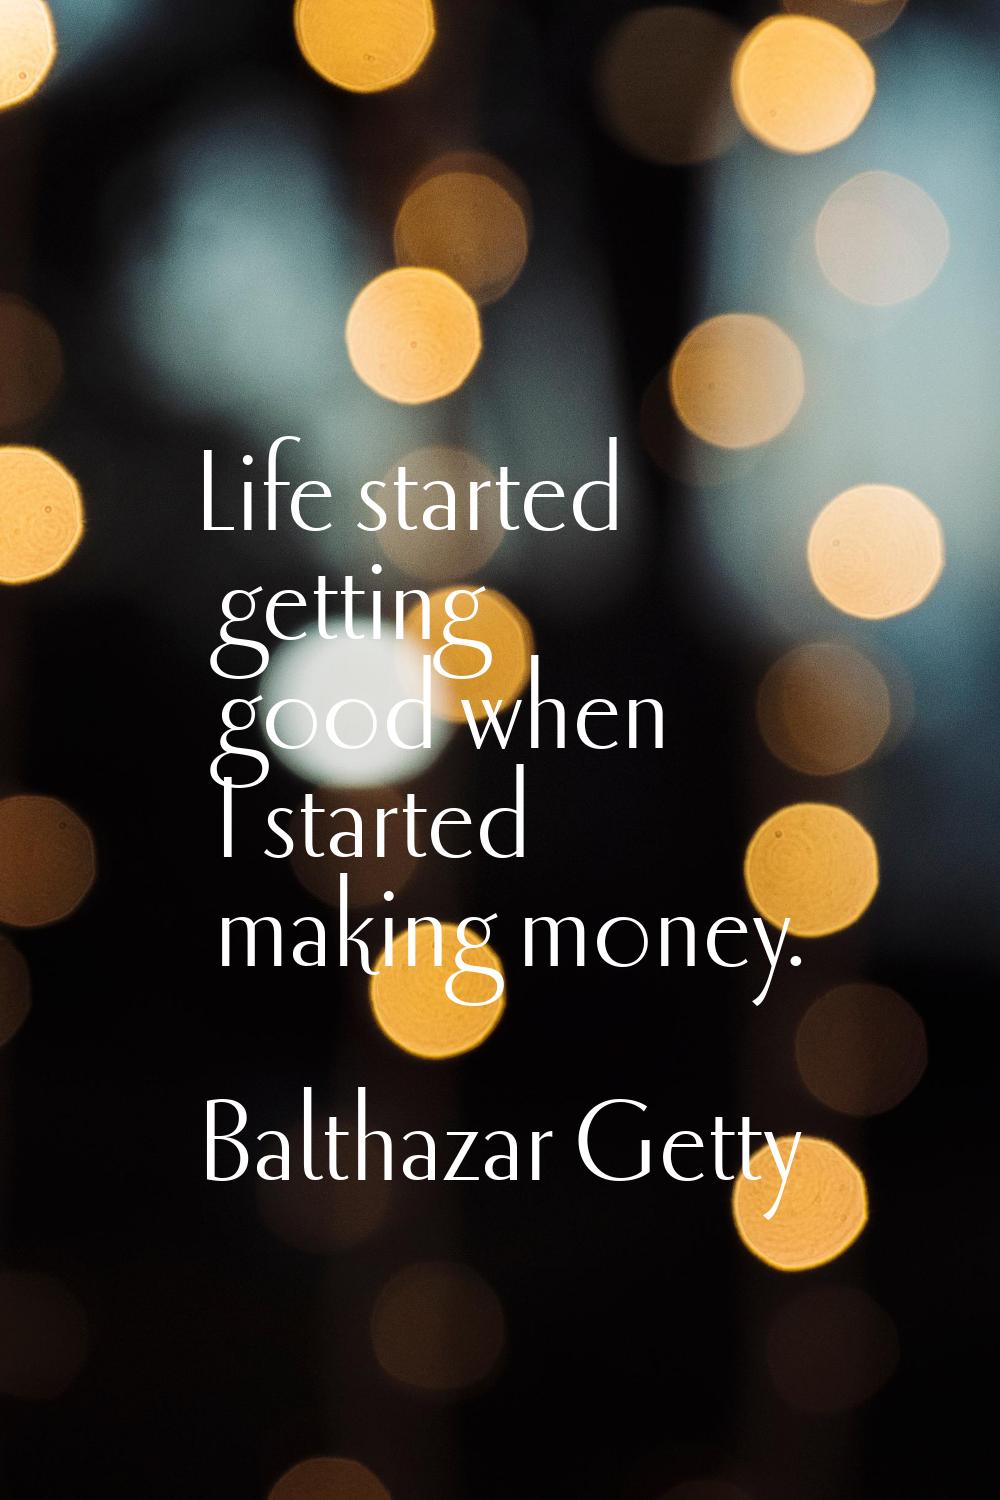 Life started getting good when I started making money.